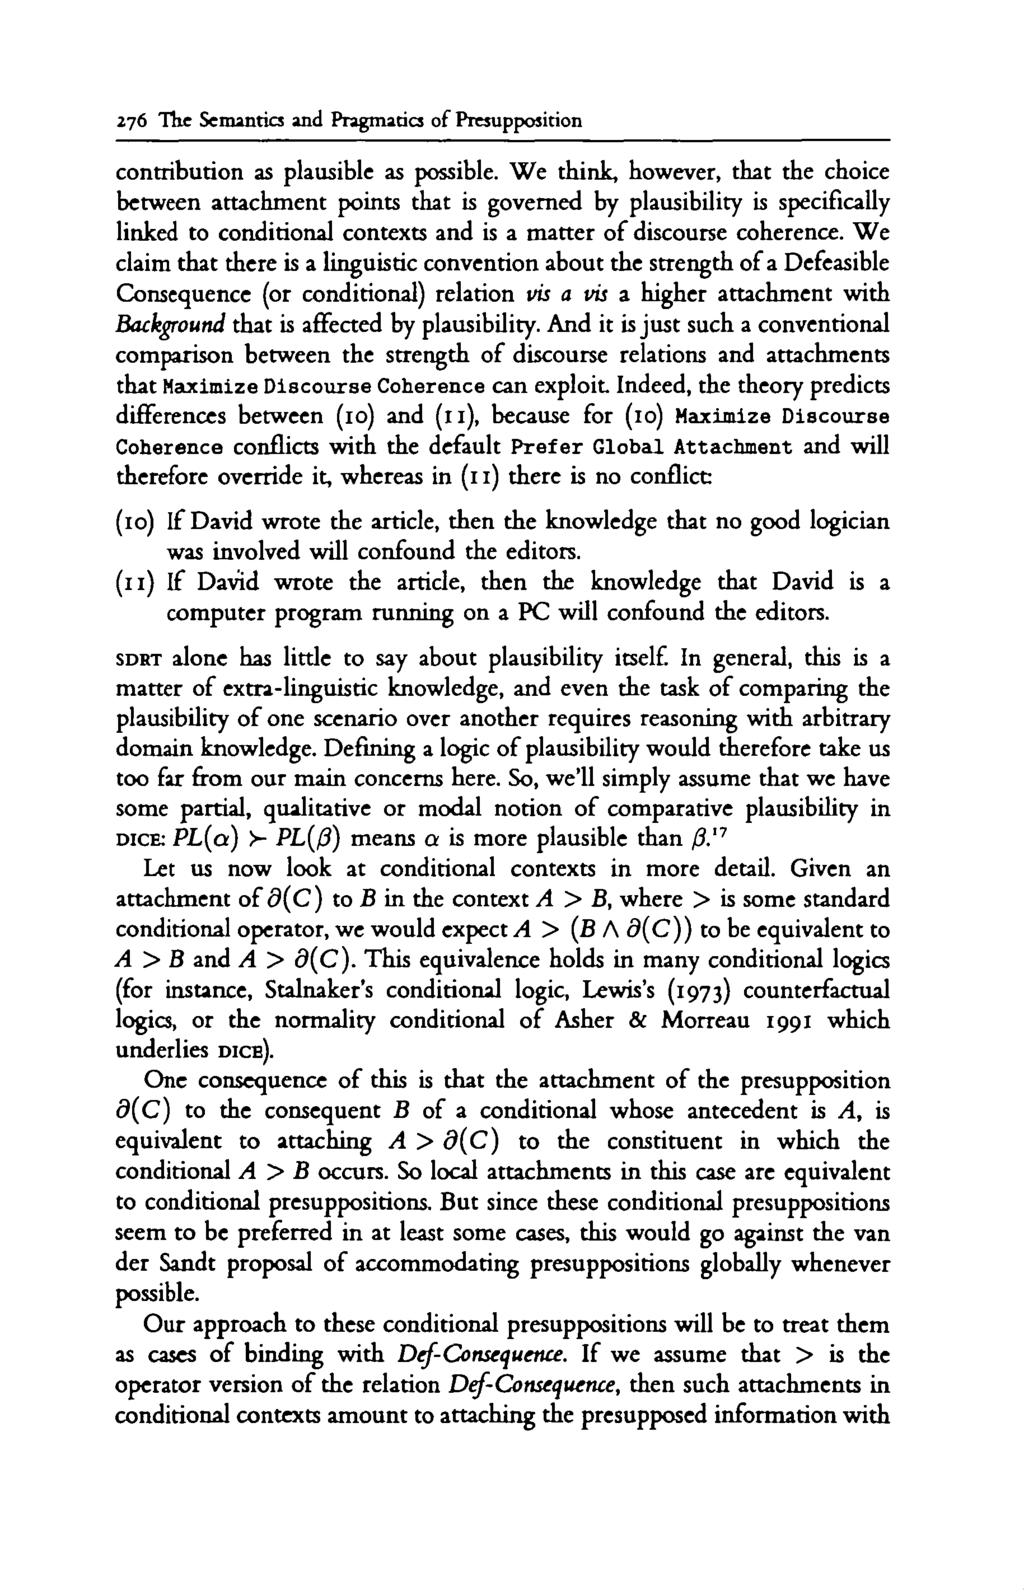 276 The Semantics and Pragmatics of Presupposition contribution as plausible as possible.